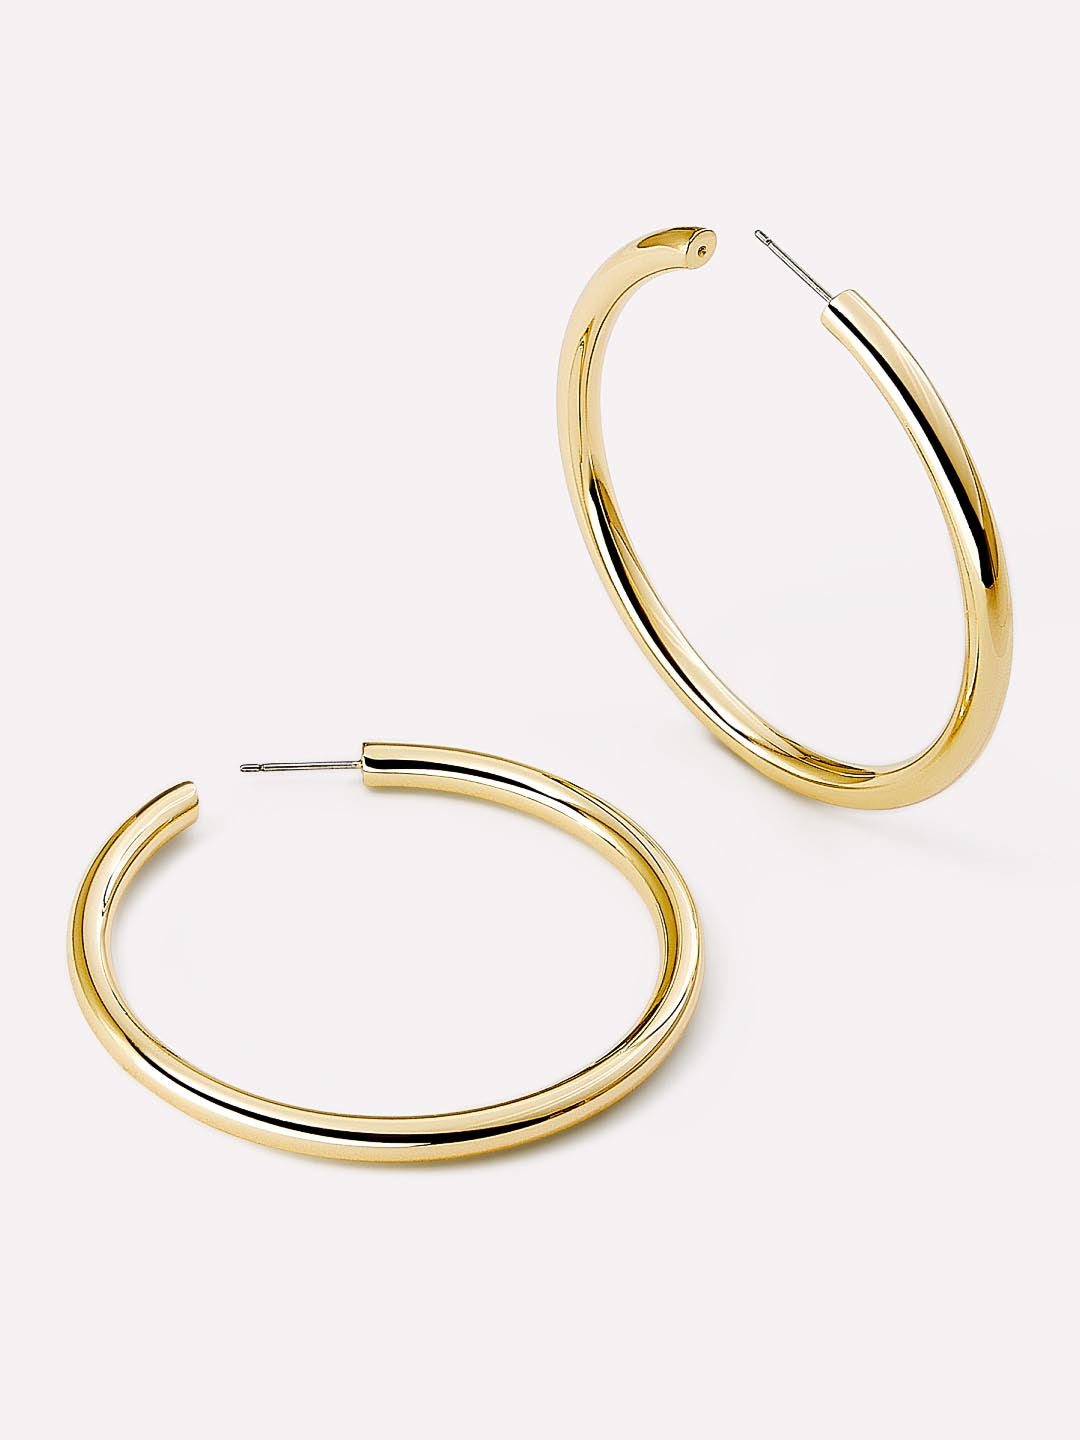 Buy Small Chunky Thick Gold Hoop Earrings Mini Gold Huggie Hoops for Women  Girls at Amazon.in